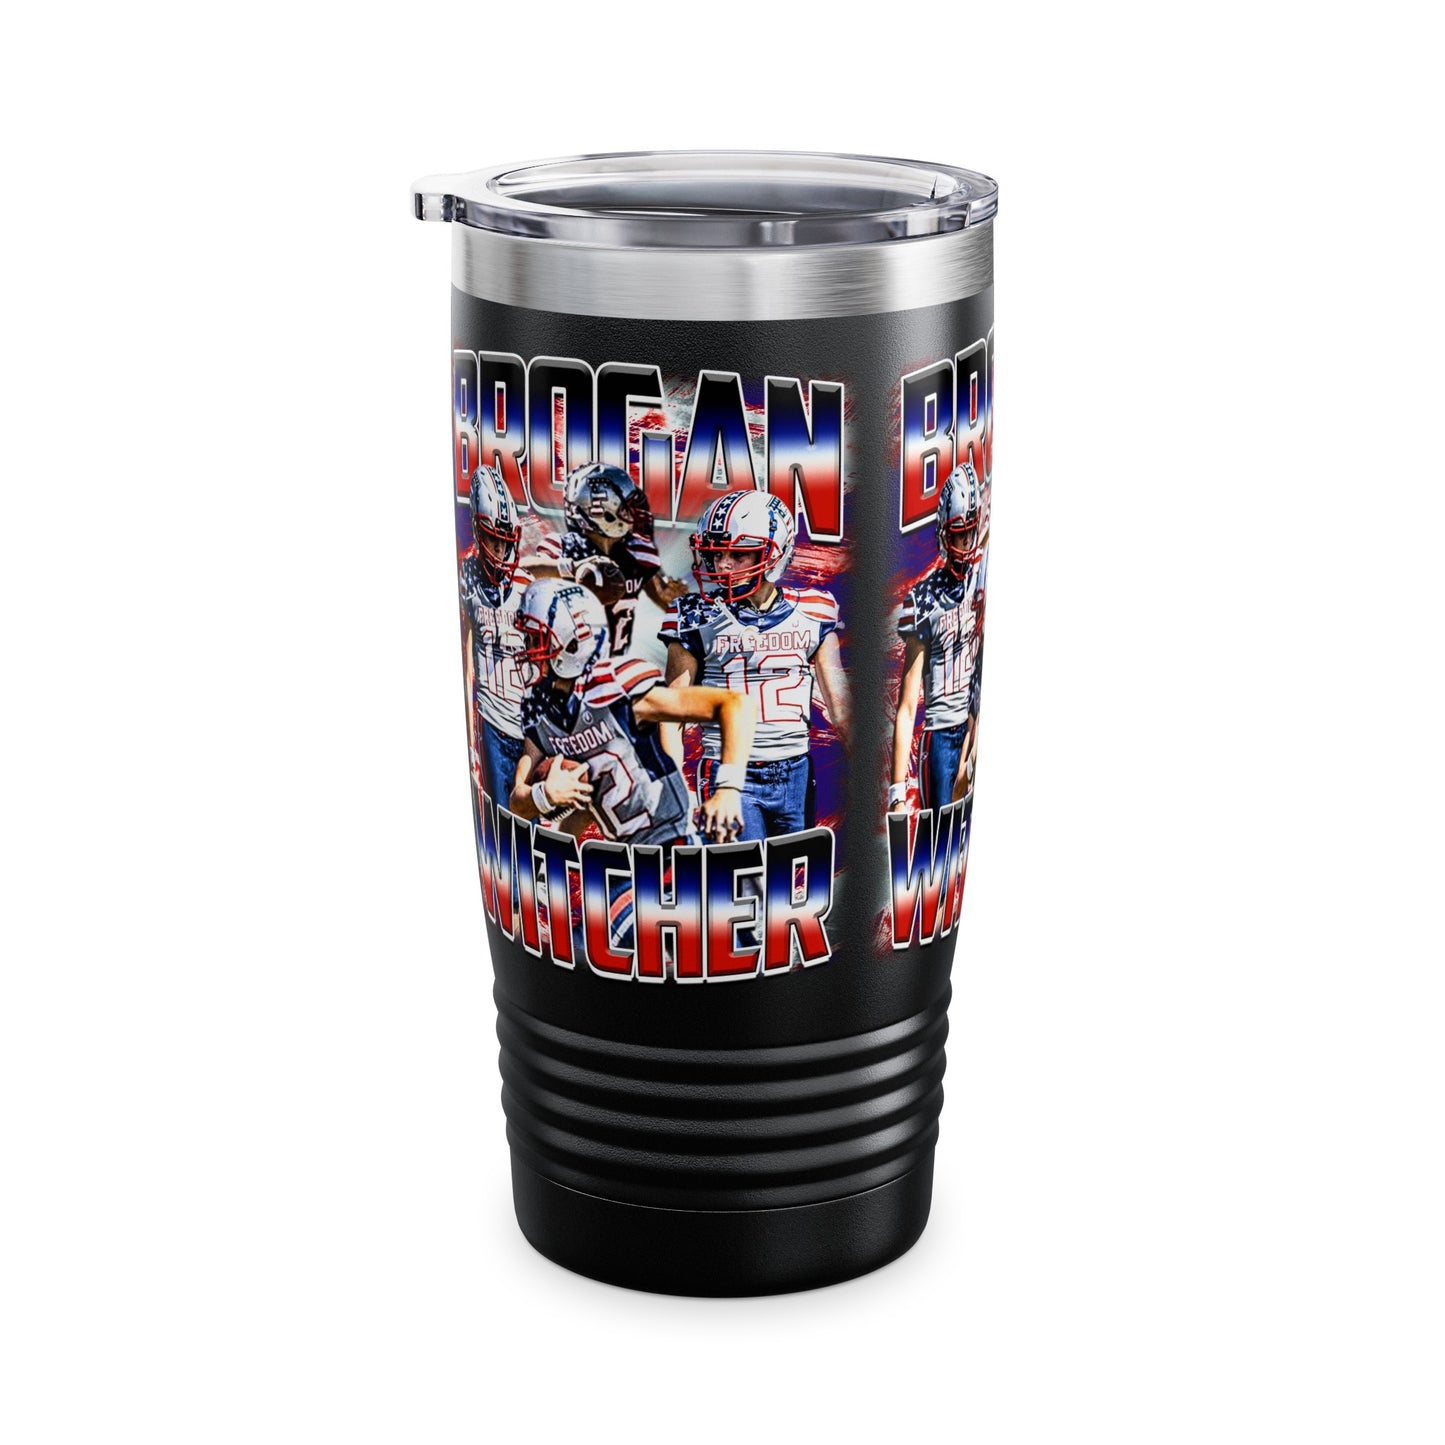 Brogan Witcher Stainless Steal Tumbler